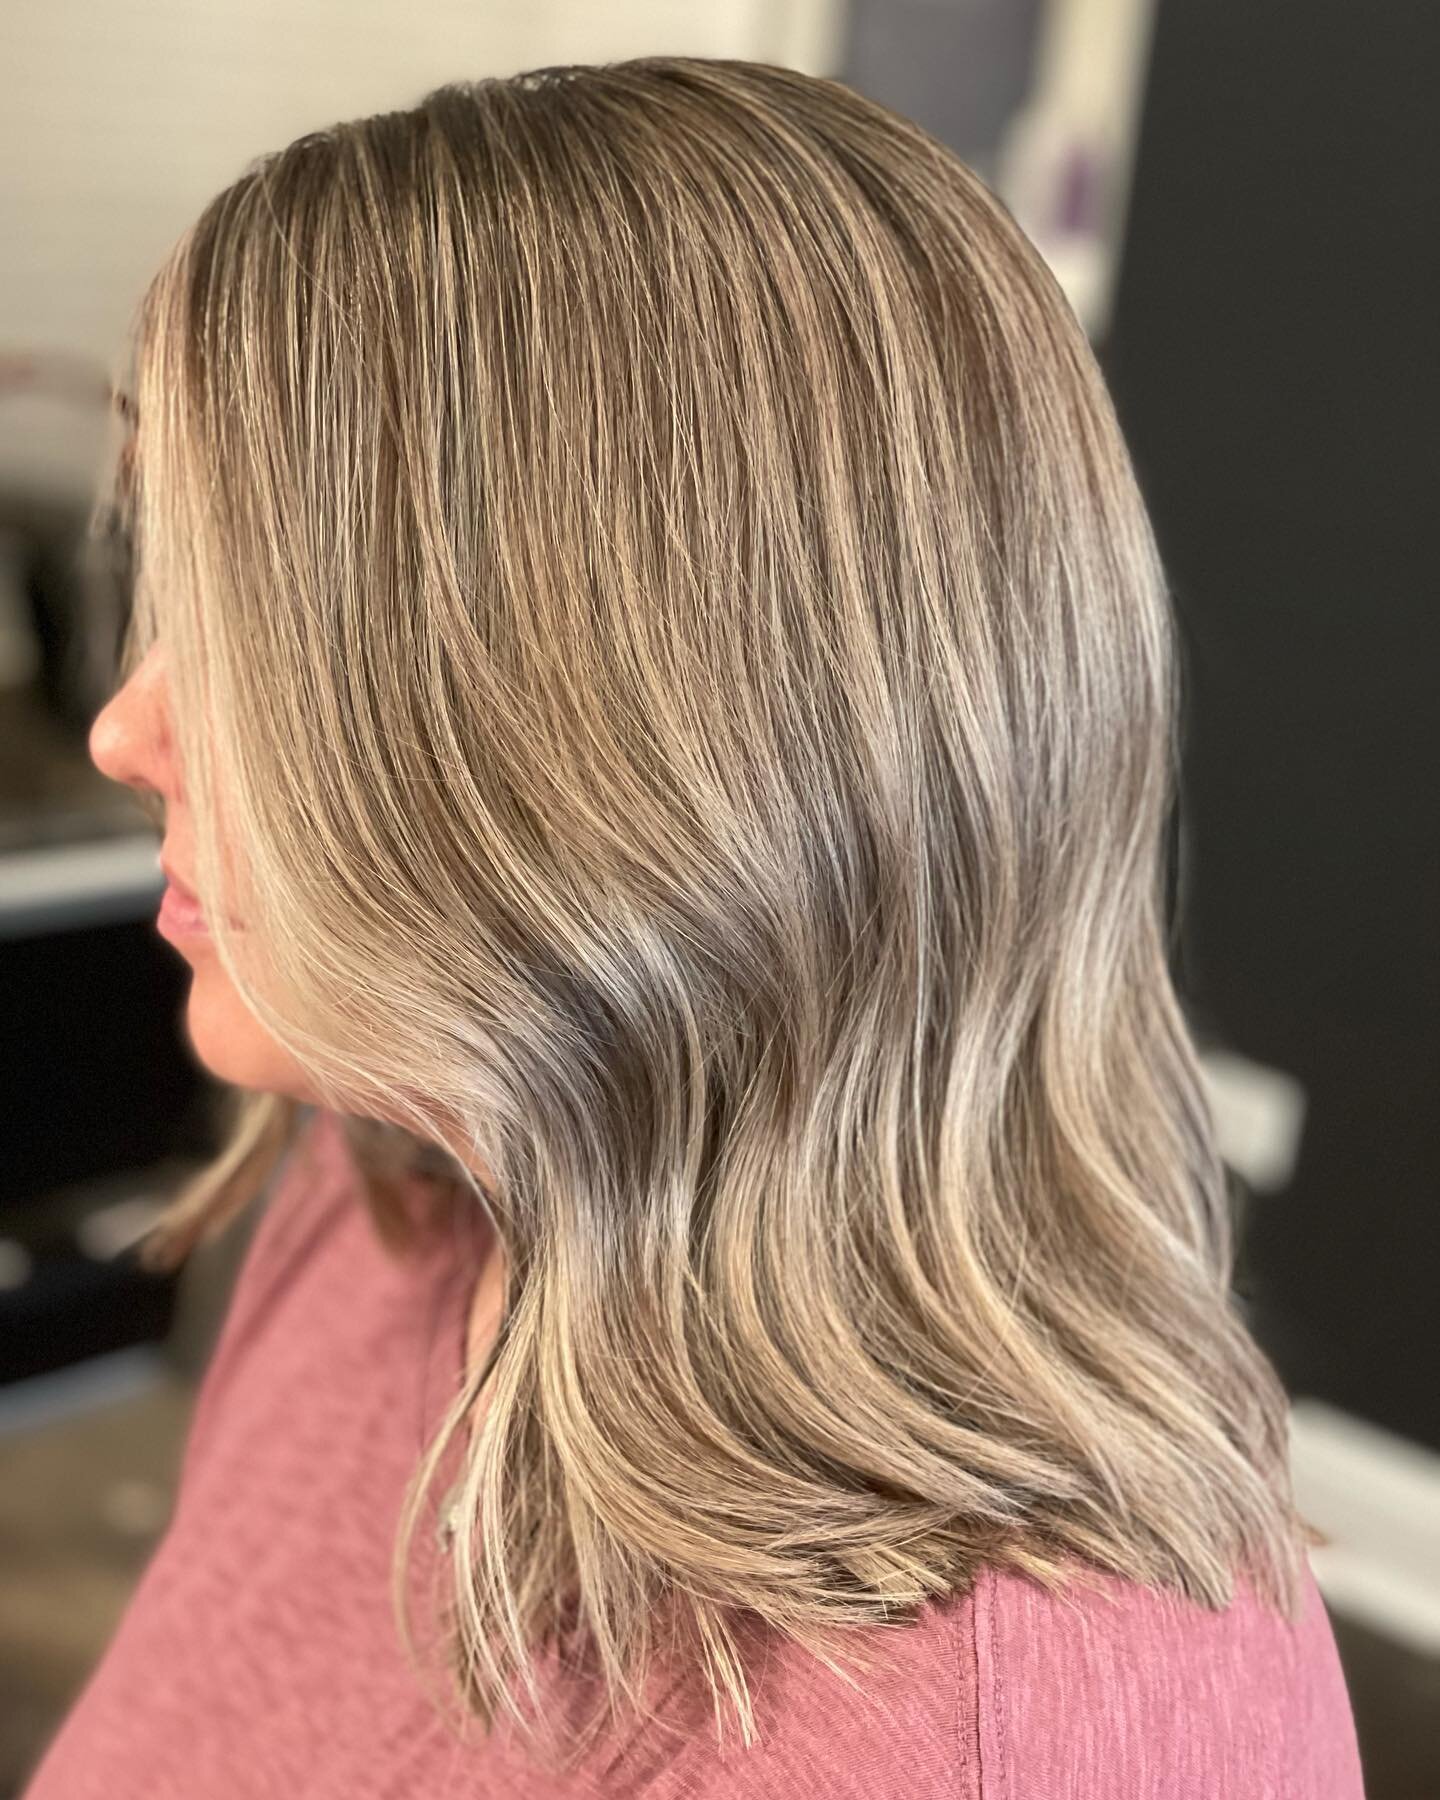 So melty 😍

#chicagohairstylist #blondehair #ashblonde